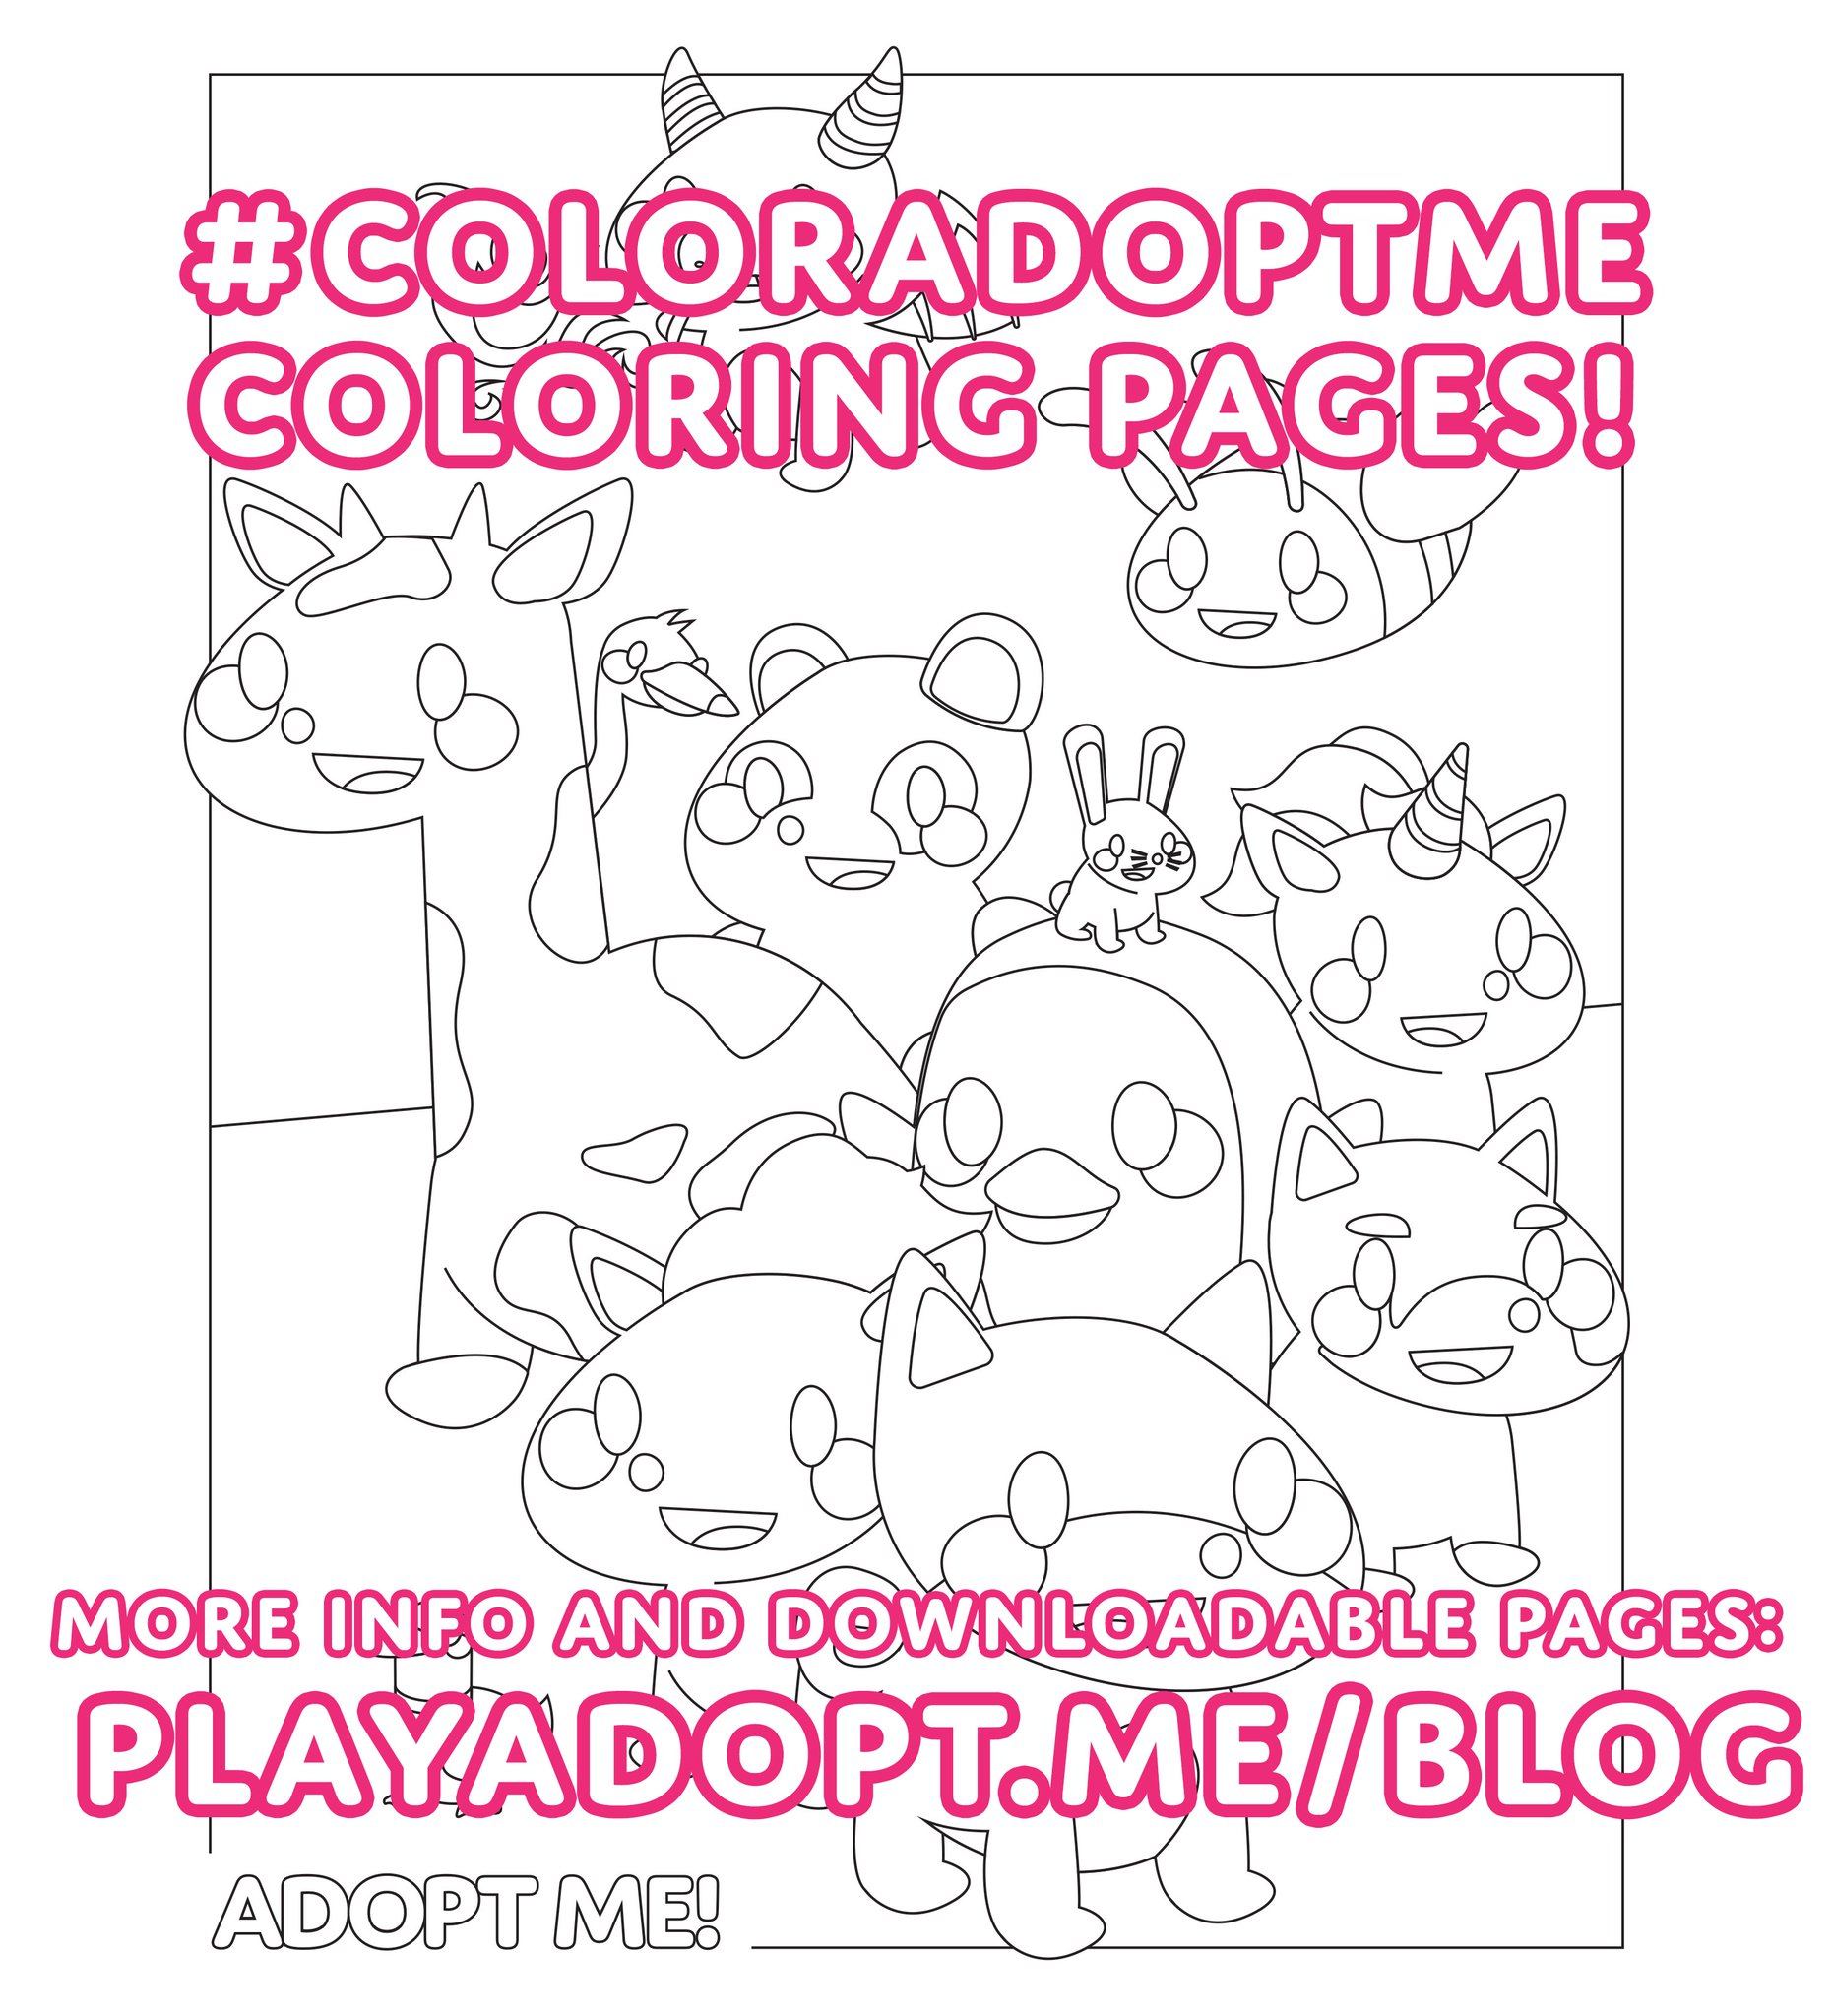 Adopt Me On Twitter The Last Two Coloring Pages Are Up On Our Blog Now We Ll Choose Our Favorites To Send Pets To Over The Next Week So Share Your Version - roblox coloring pages adopt me